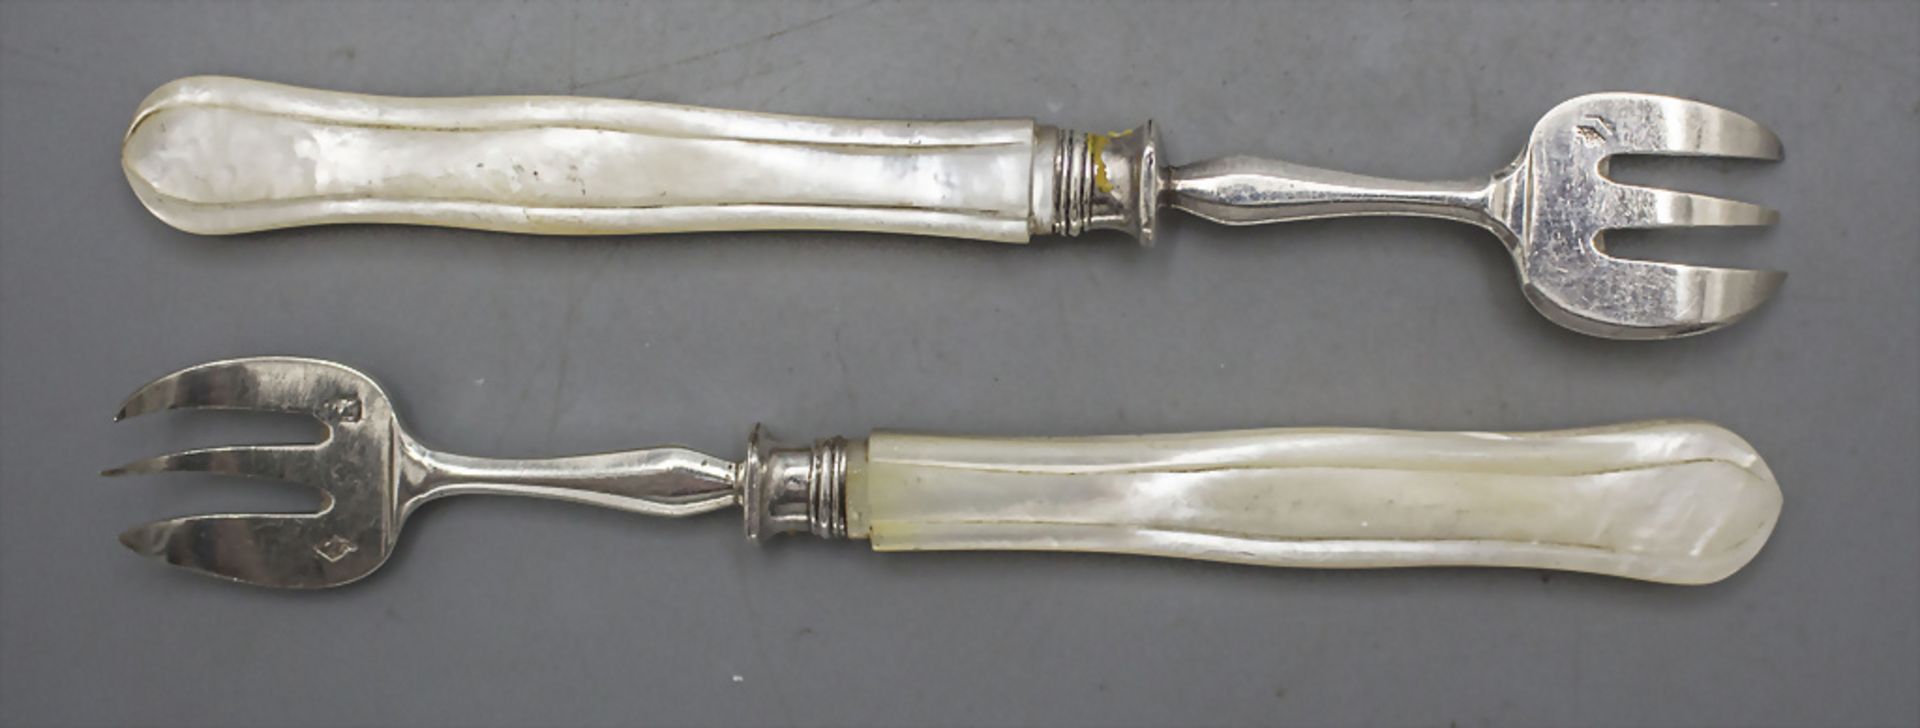 6 Austerngabeln mit Perlmuttgriffen / A set of 6 silver oyster forks with mother of pearl ... - Image 2 of 4